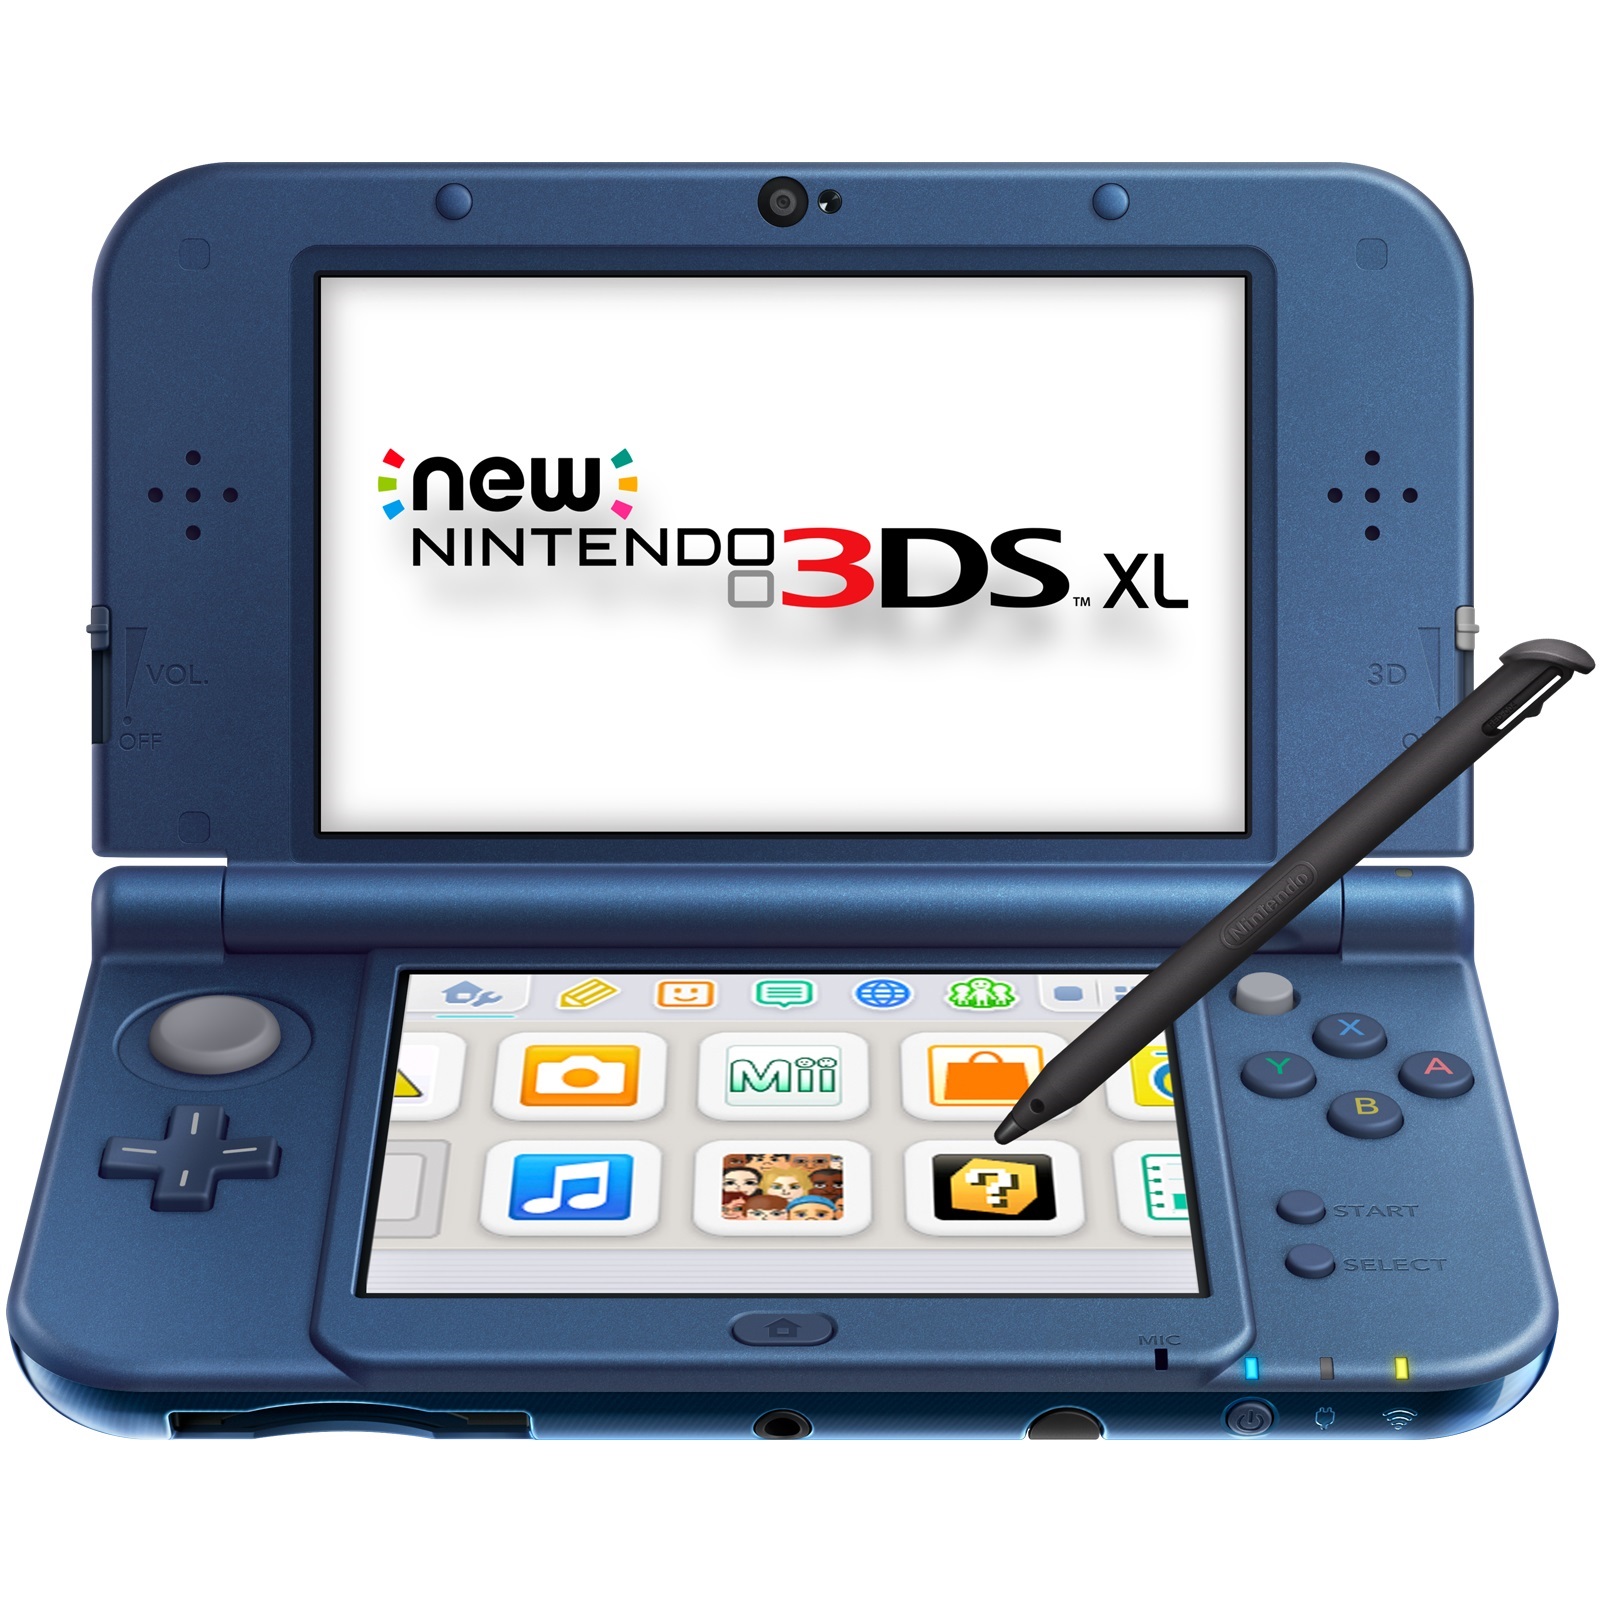 Nintendo Refurbished Consoles: 2DS $50, New 2DS XL $100, New 3DS XL